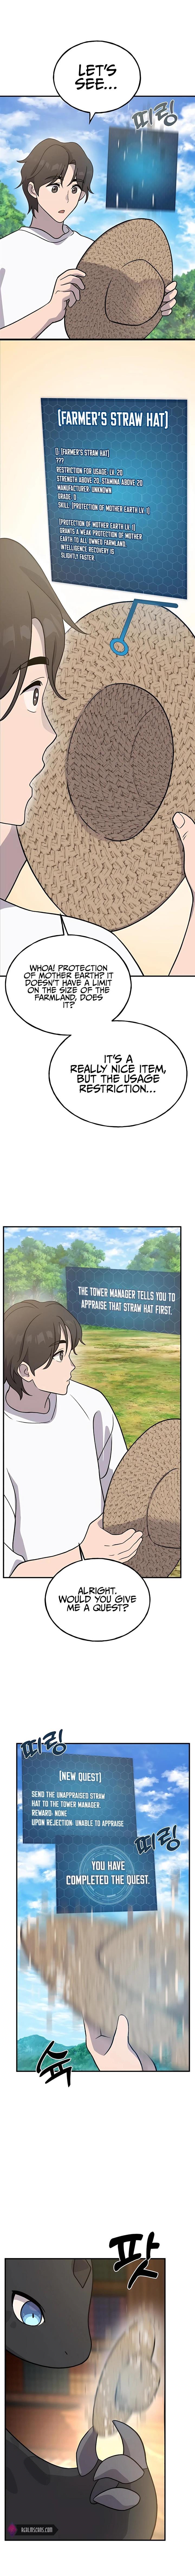 Solo Farming In The Tower chapter 30